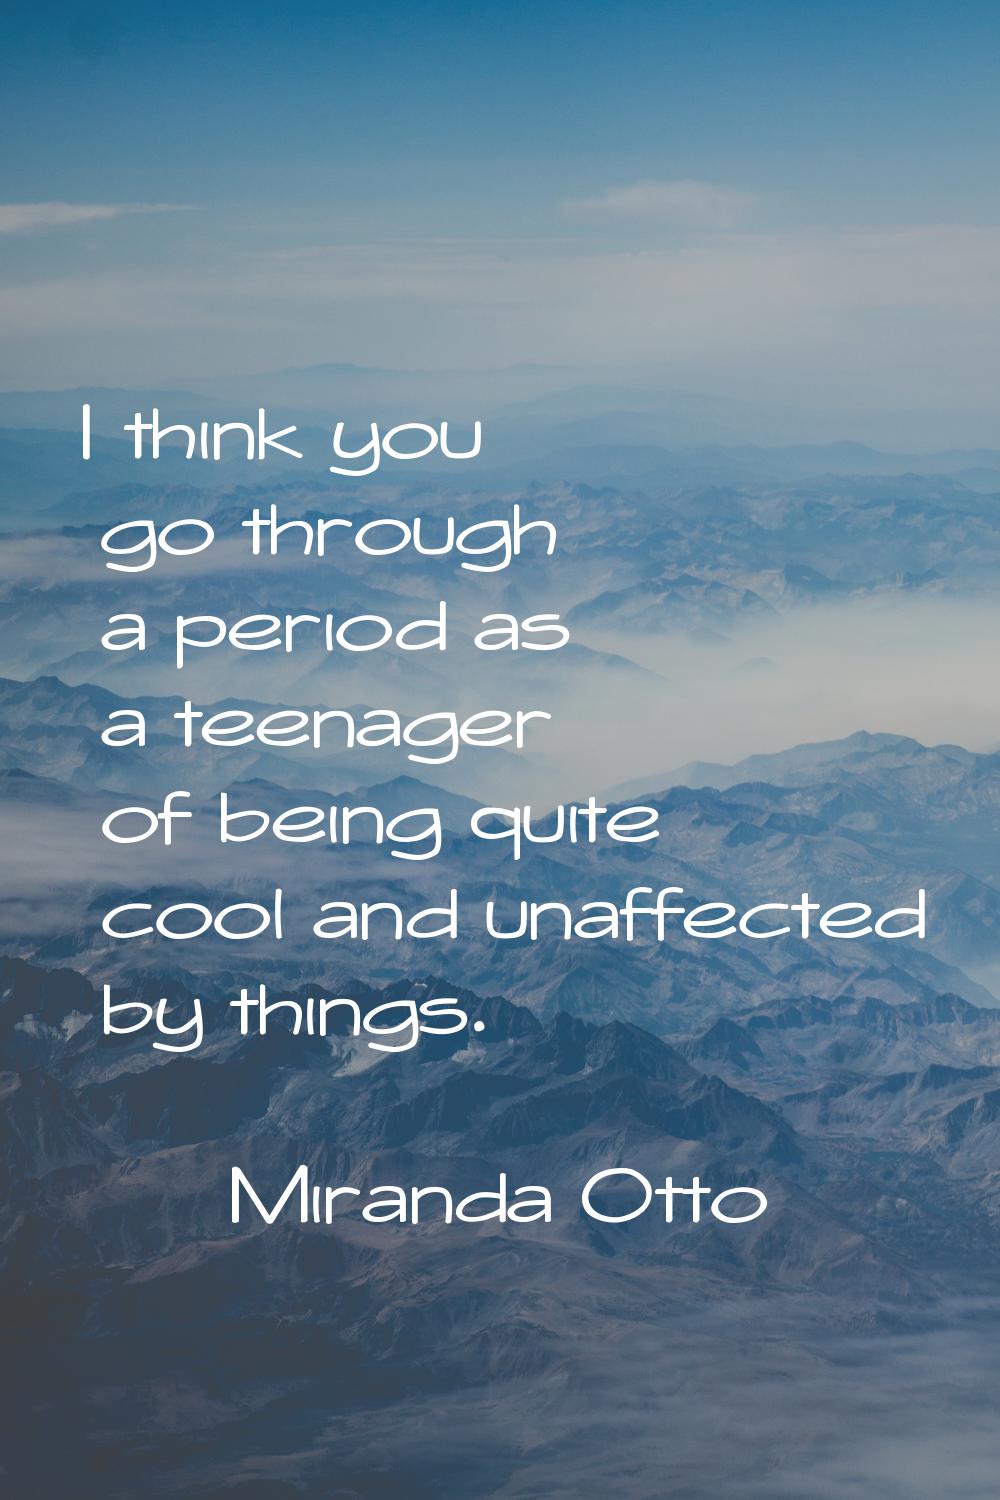 I think you go through a period as a teenager of being quite cool and unaffected by things.